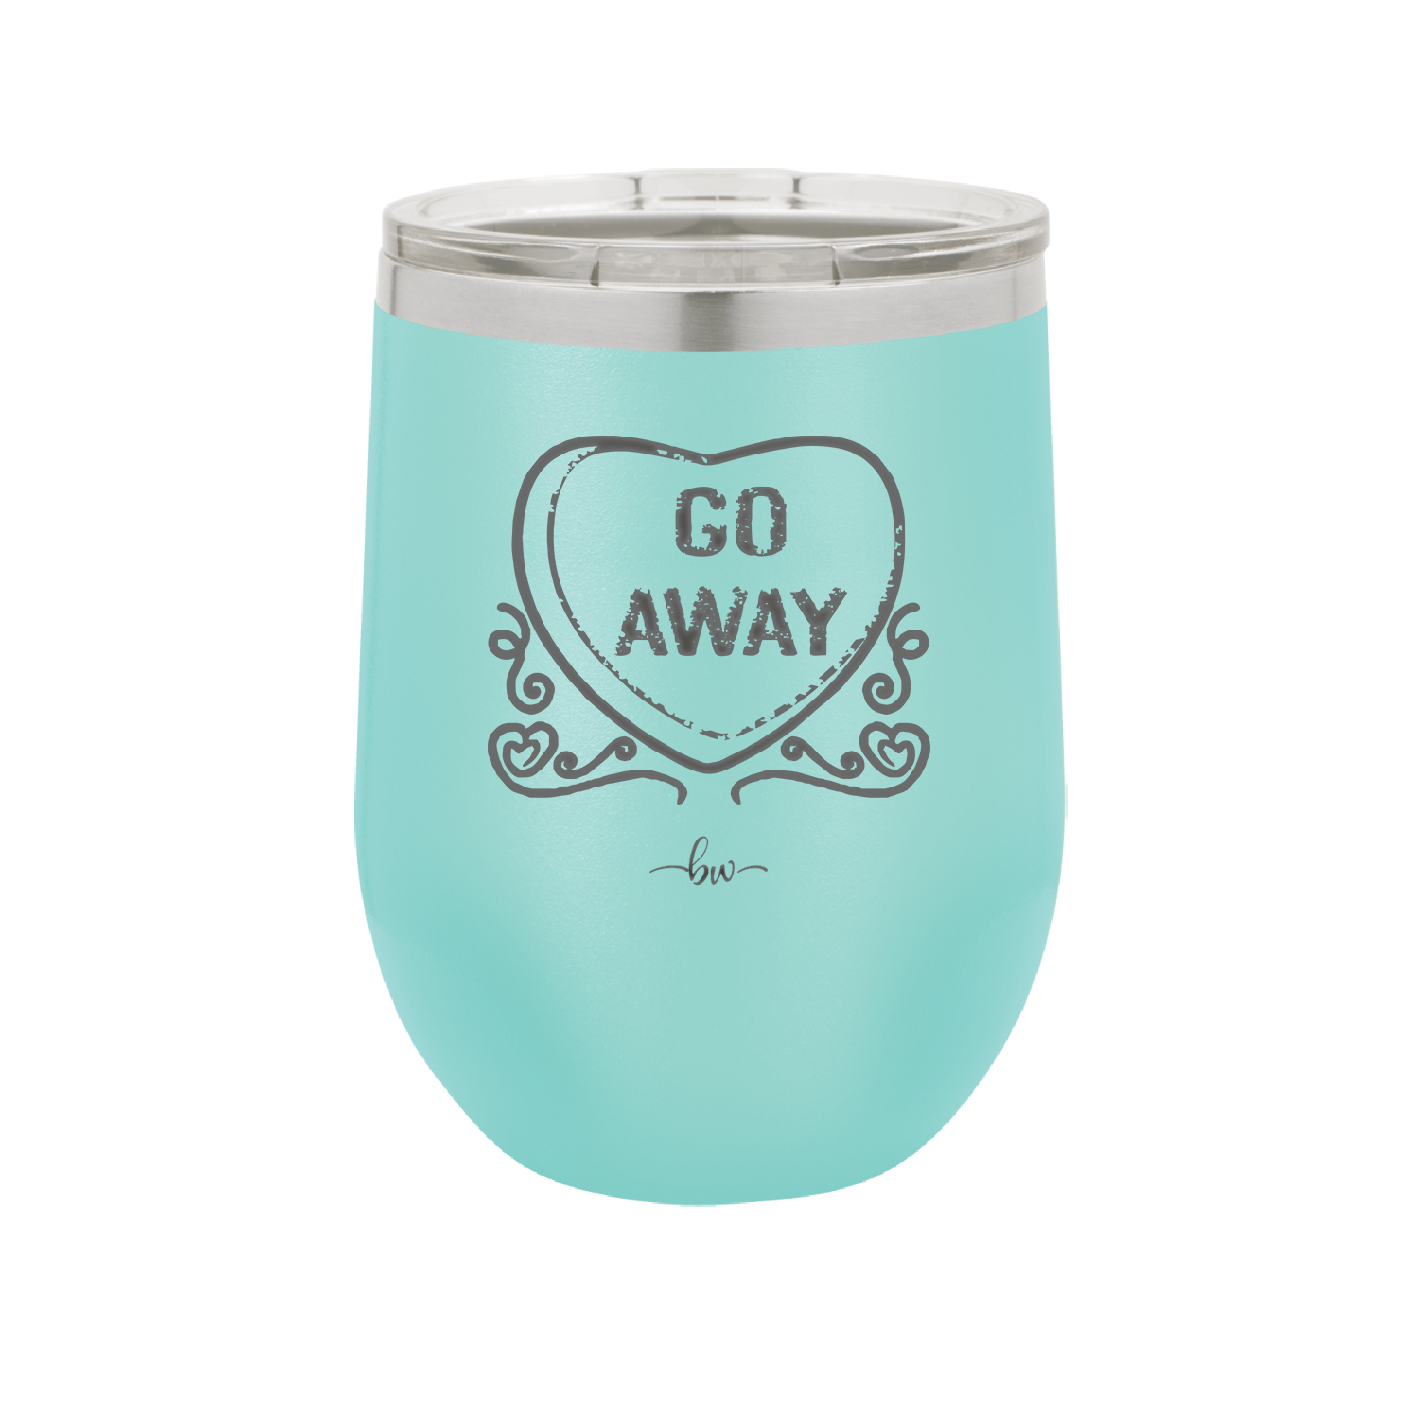 Candy Heart Go Away - Laser Engraved Stainless Steel Drinkware - 1761 -